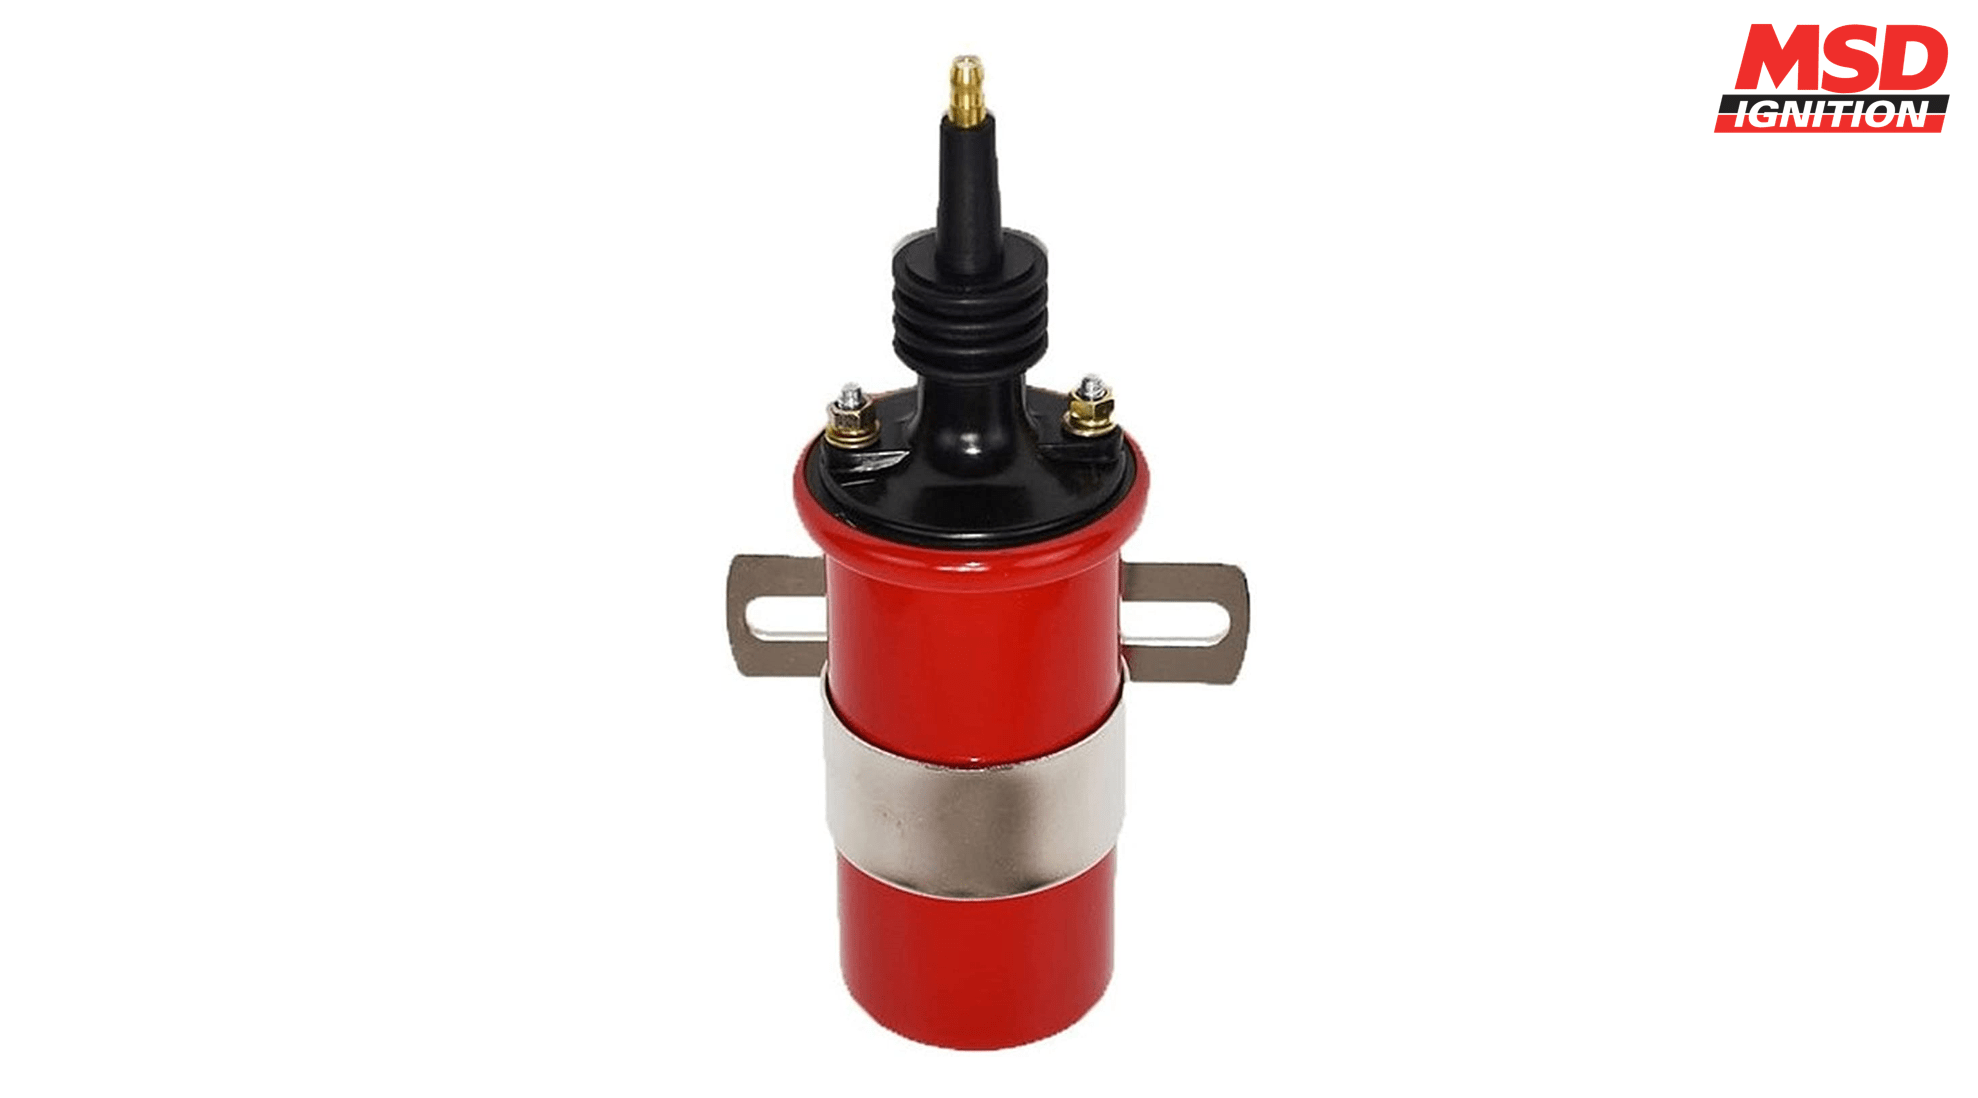 Find the best auto part for your vehicle: Improve Spark Output By Shopping The Top Brand MSD Blaster Red Ignition Coil At Affordable Prices.